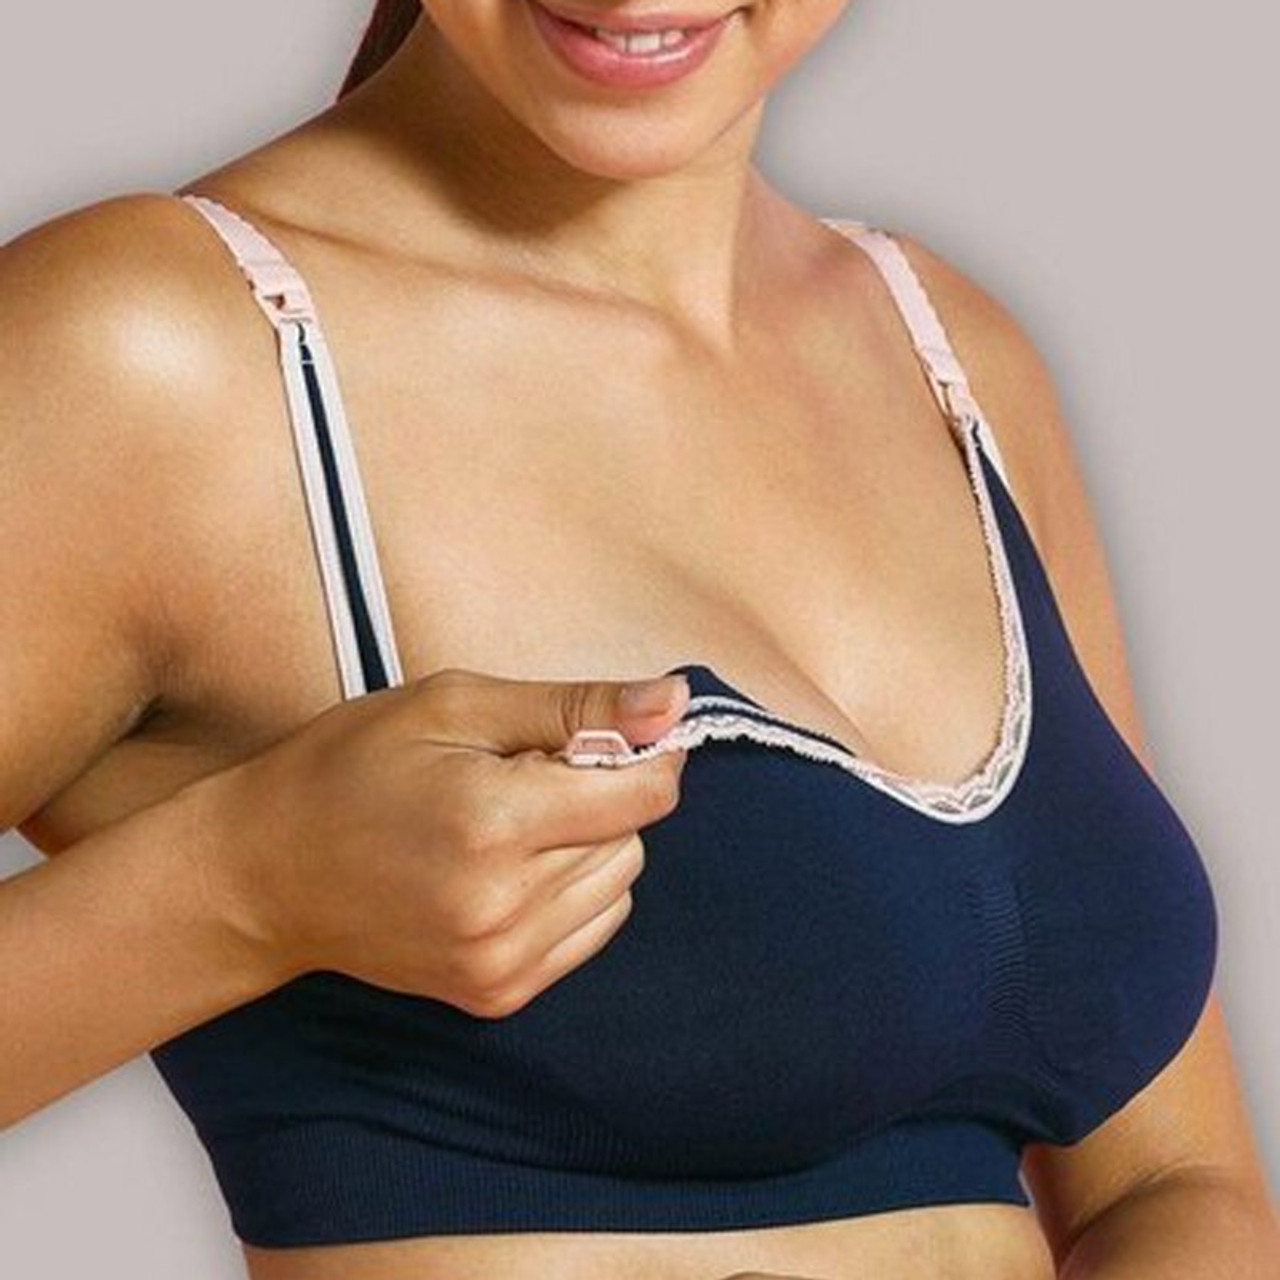 Maternity Lace Nursing Bra by Carriwell White or Black